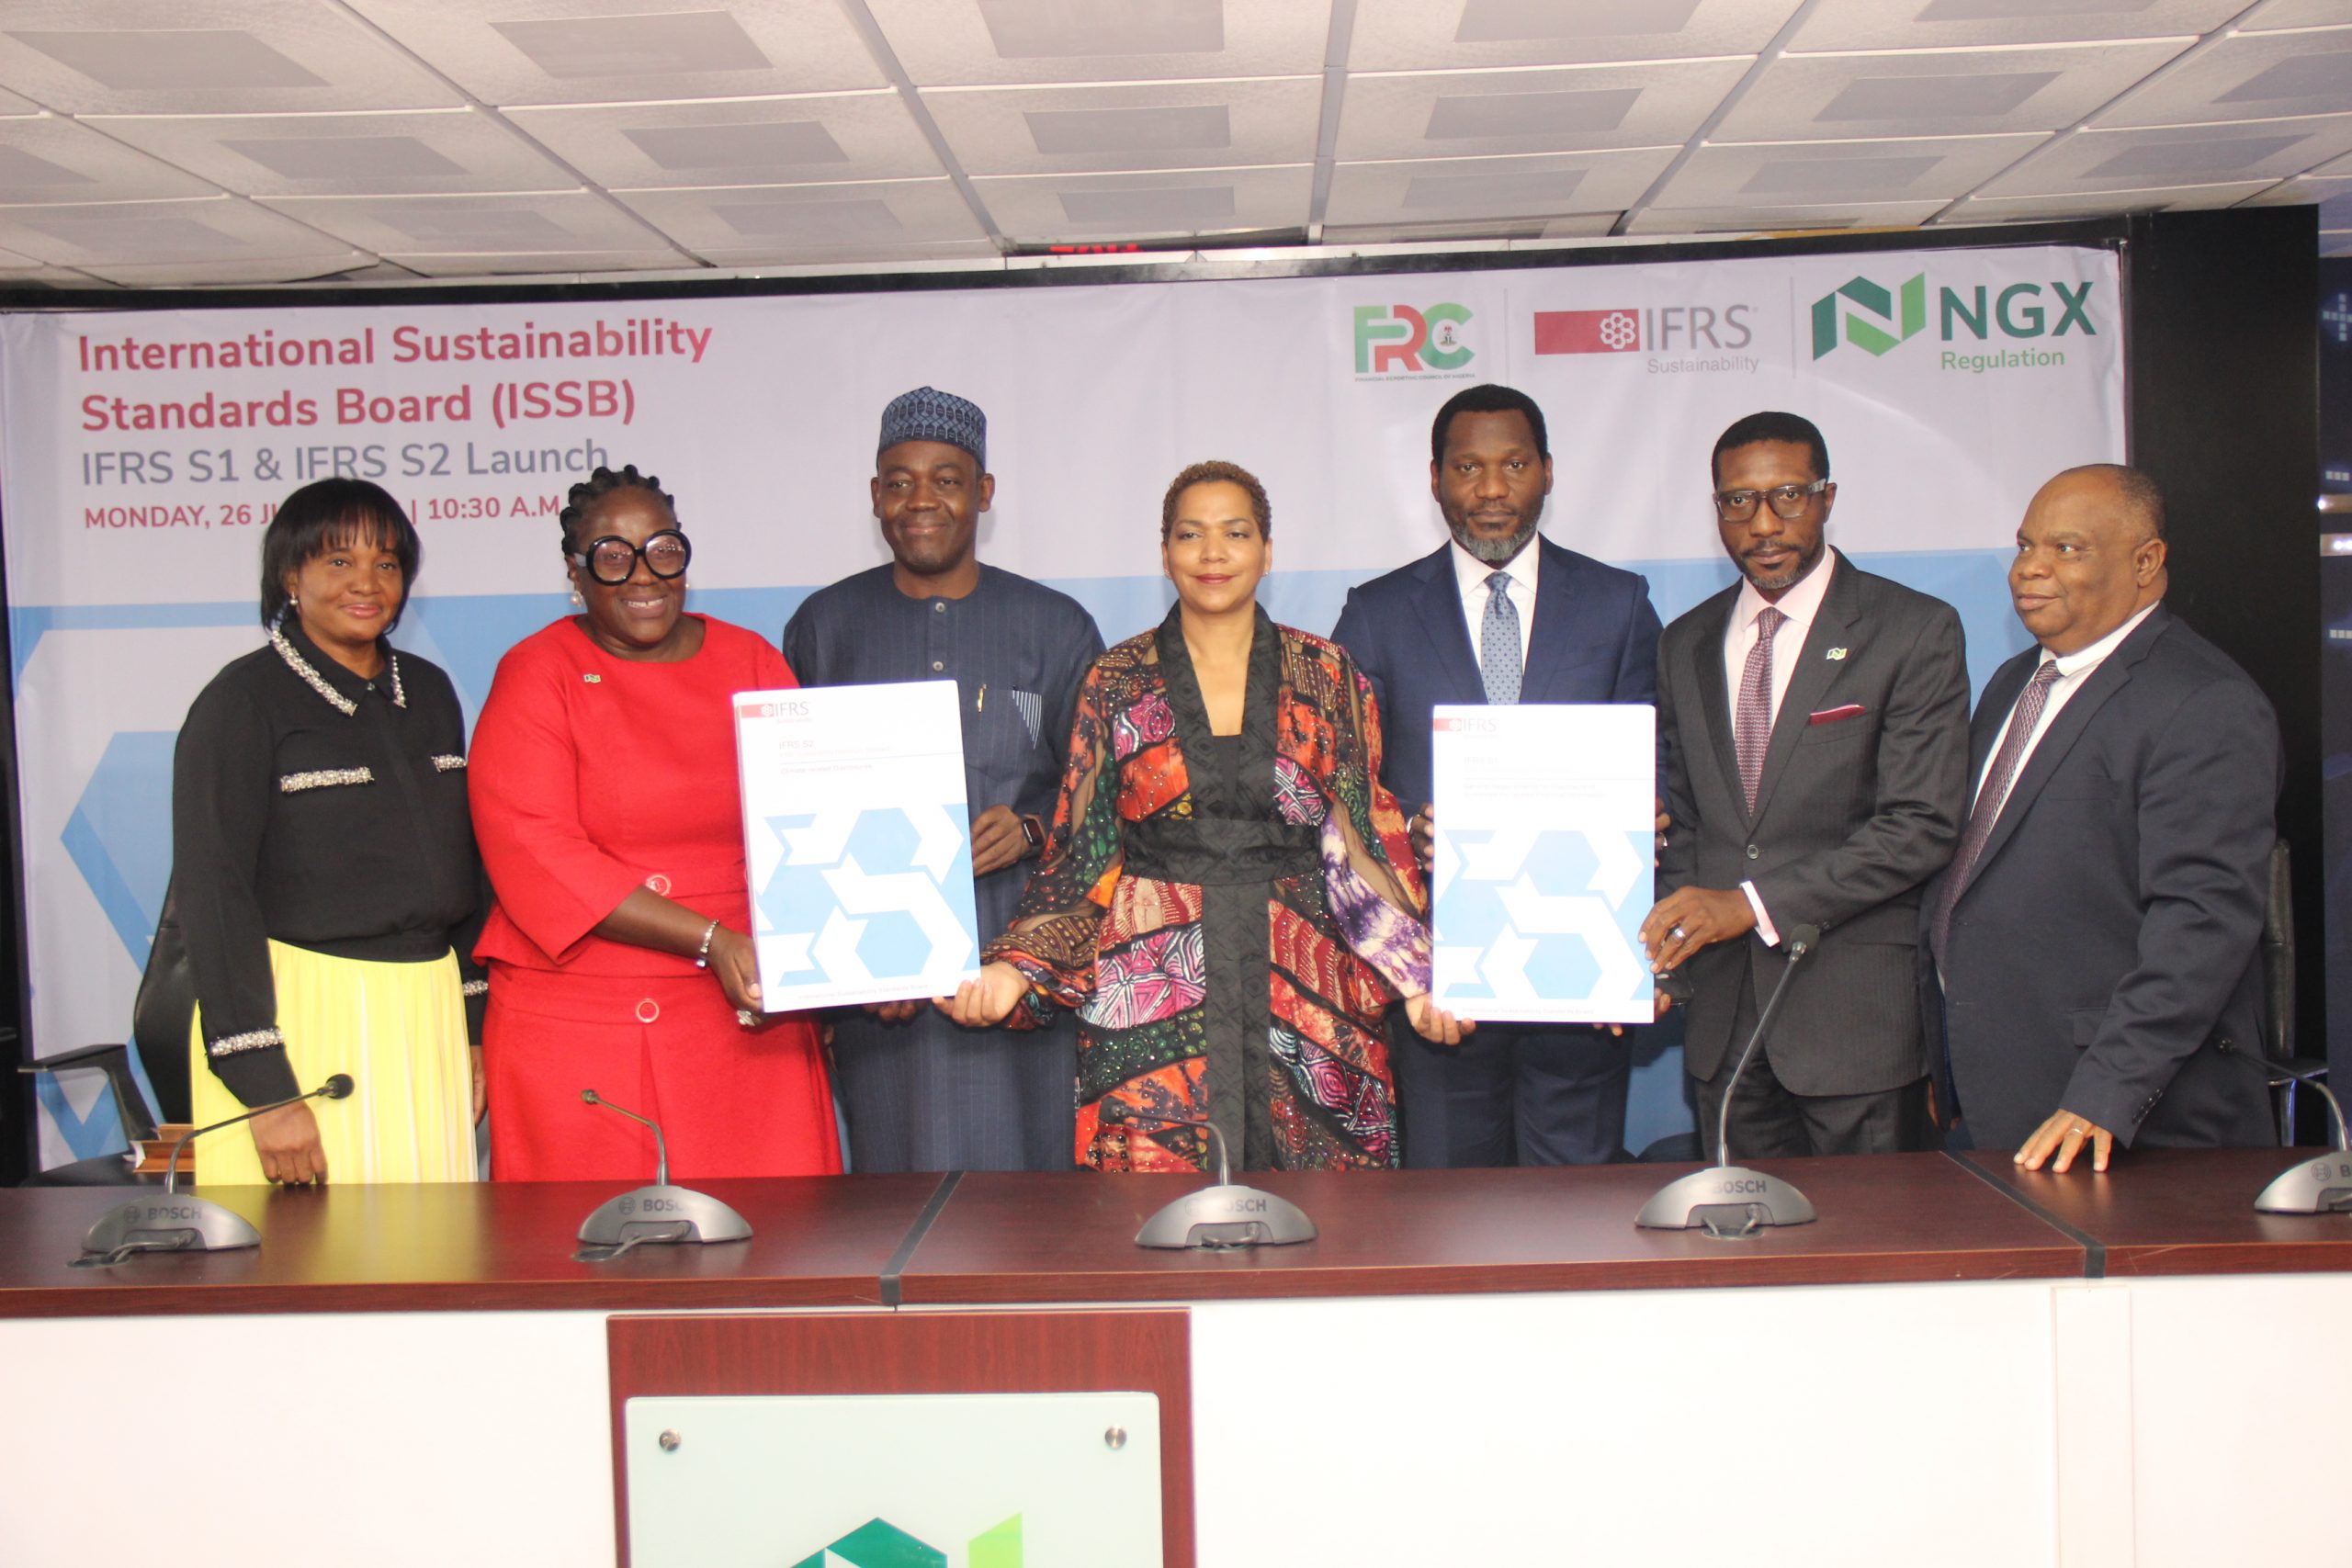 FRC, ISSB, NGX RegCo pioneer IFRS S1, IFRS S2 standards in Nigeria